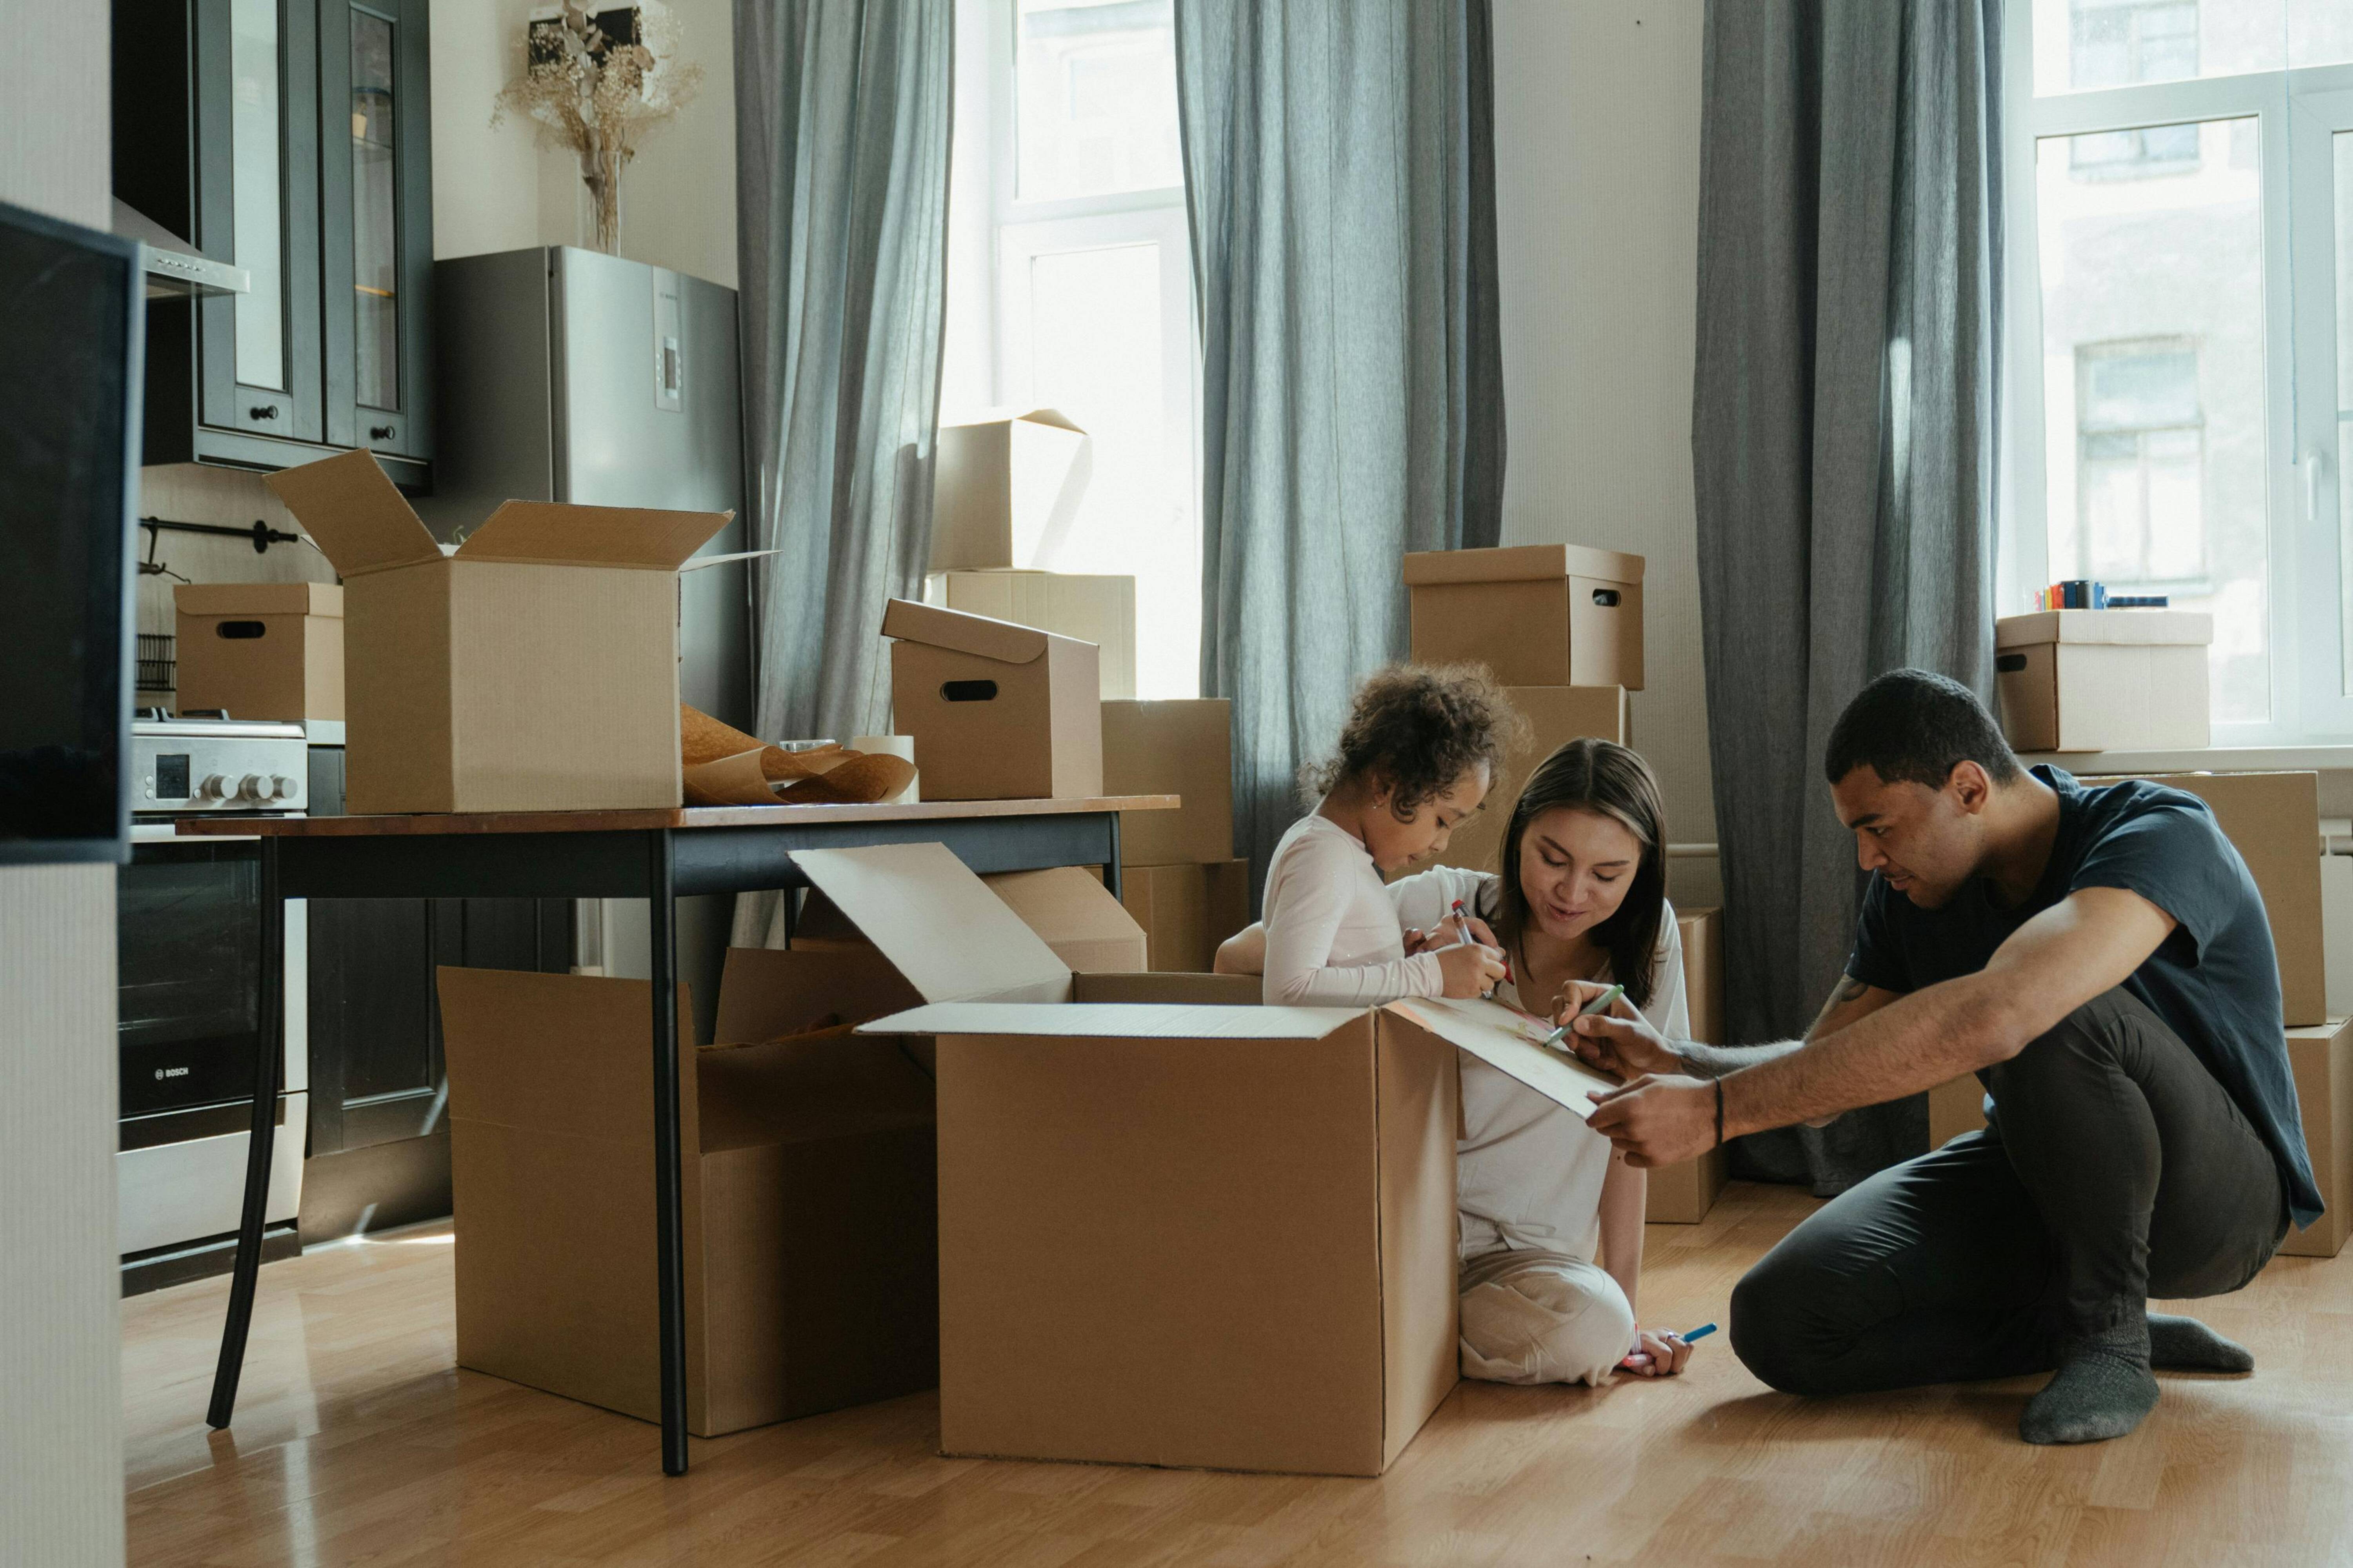 A family unpacking boxes in a room